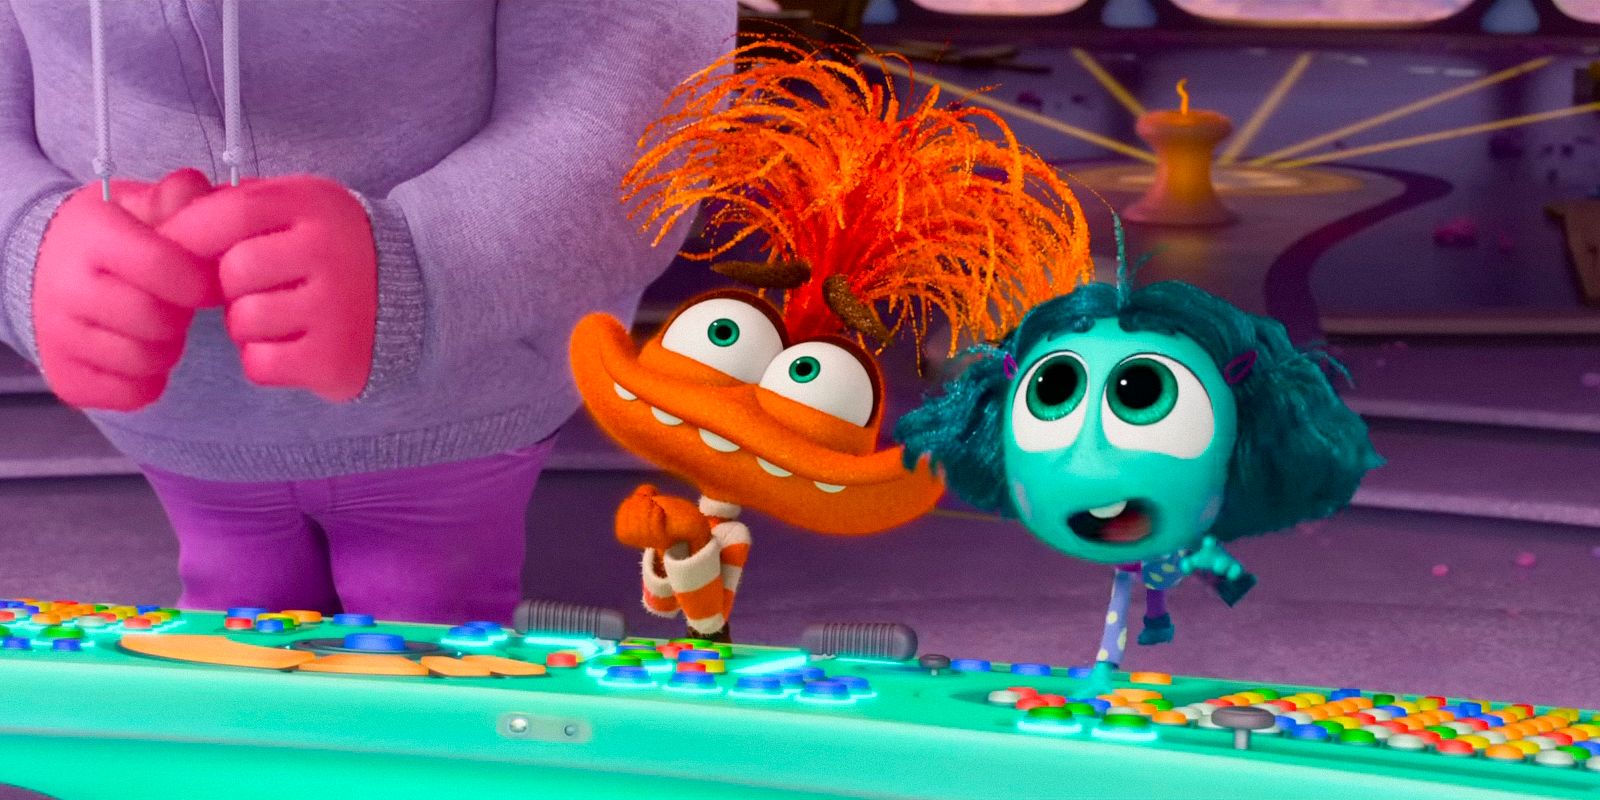 Embarrassment, Anxiety, and Envy take over the new emotional control panel in Inside Out 2